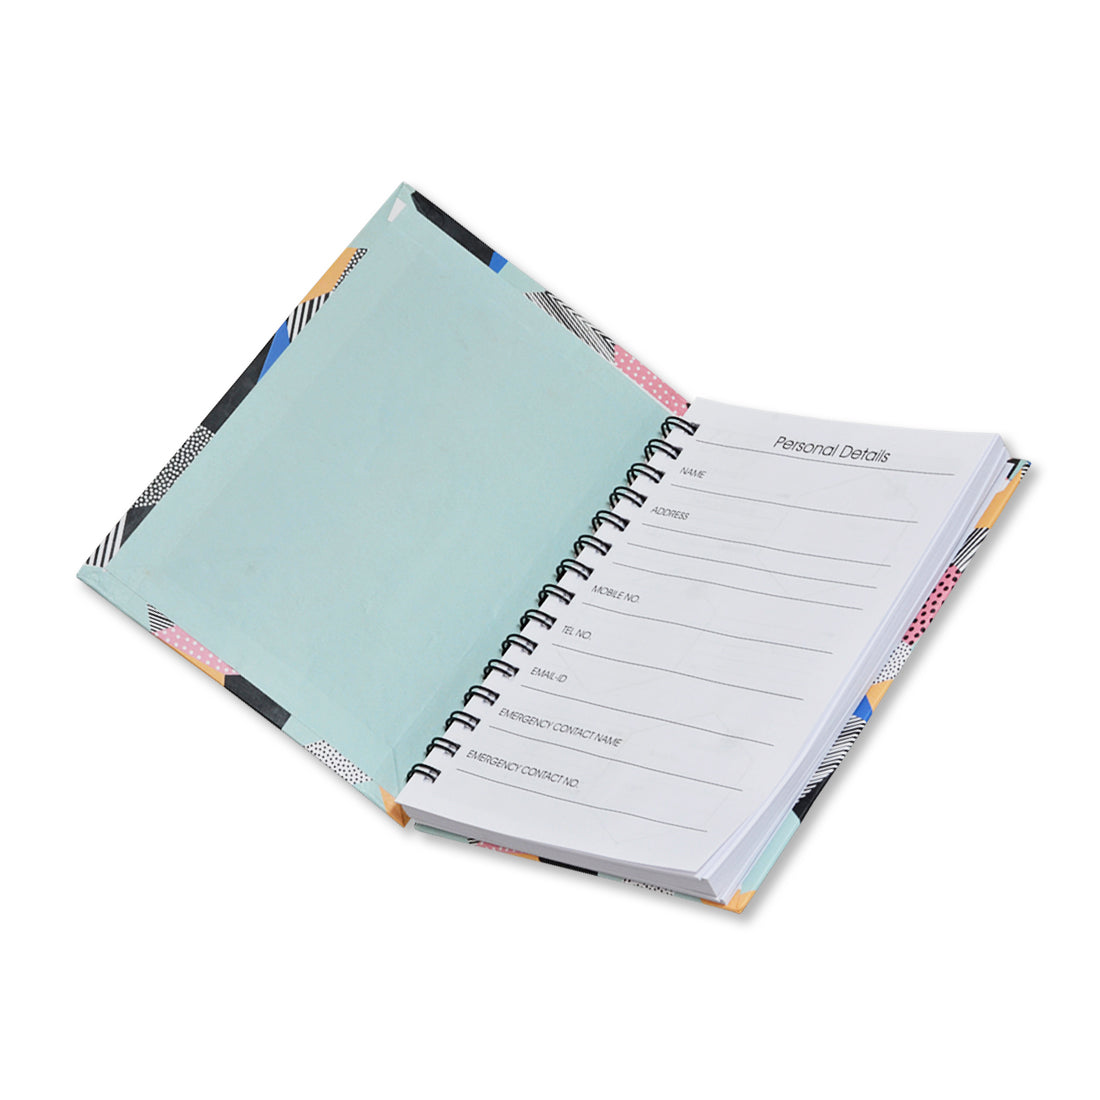 Undated Pocket Planner Calendar, Schedule with to-Do List Days Hourly Daily Diary (Set of 2)